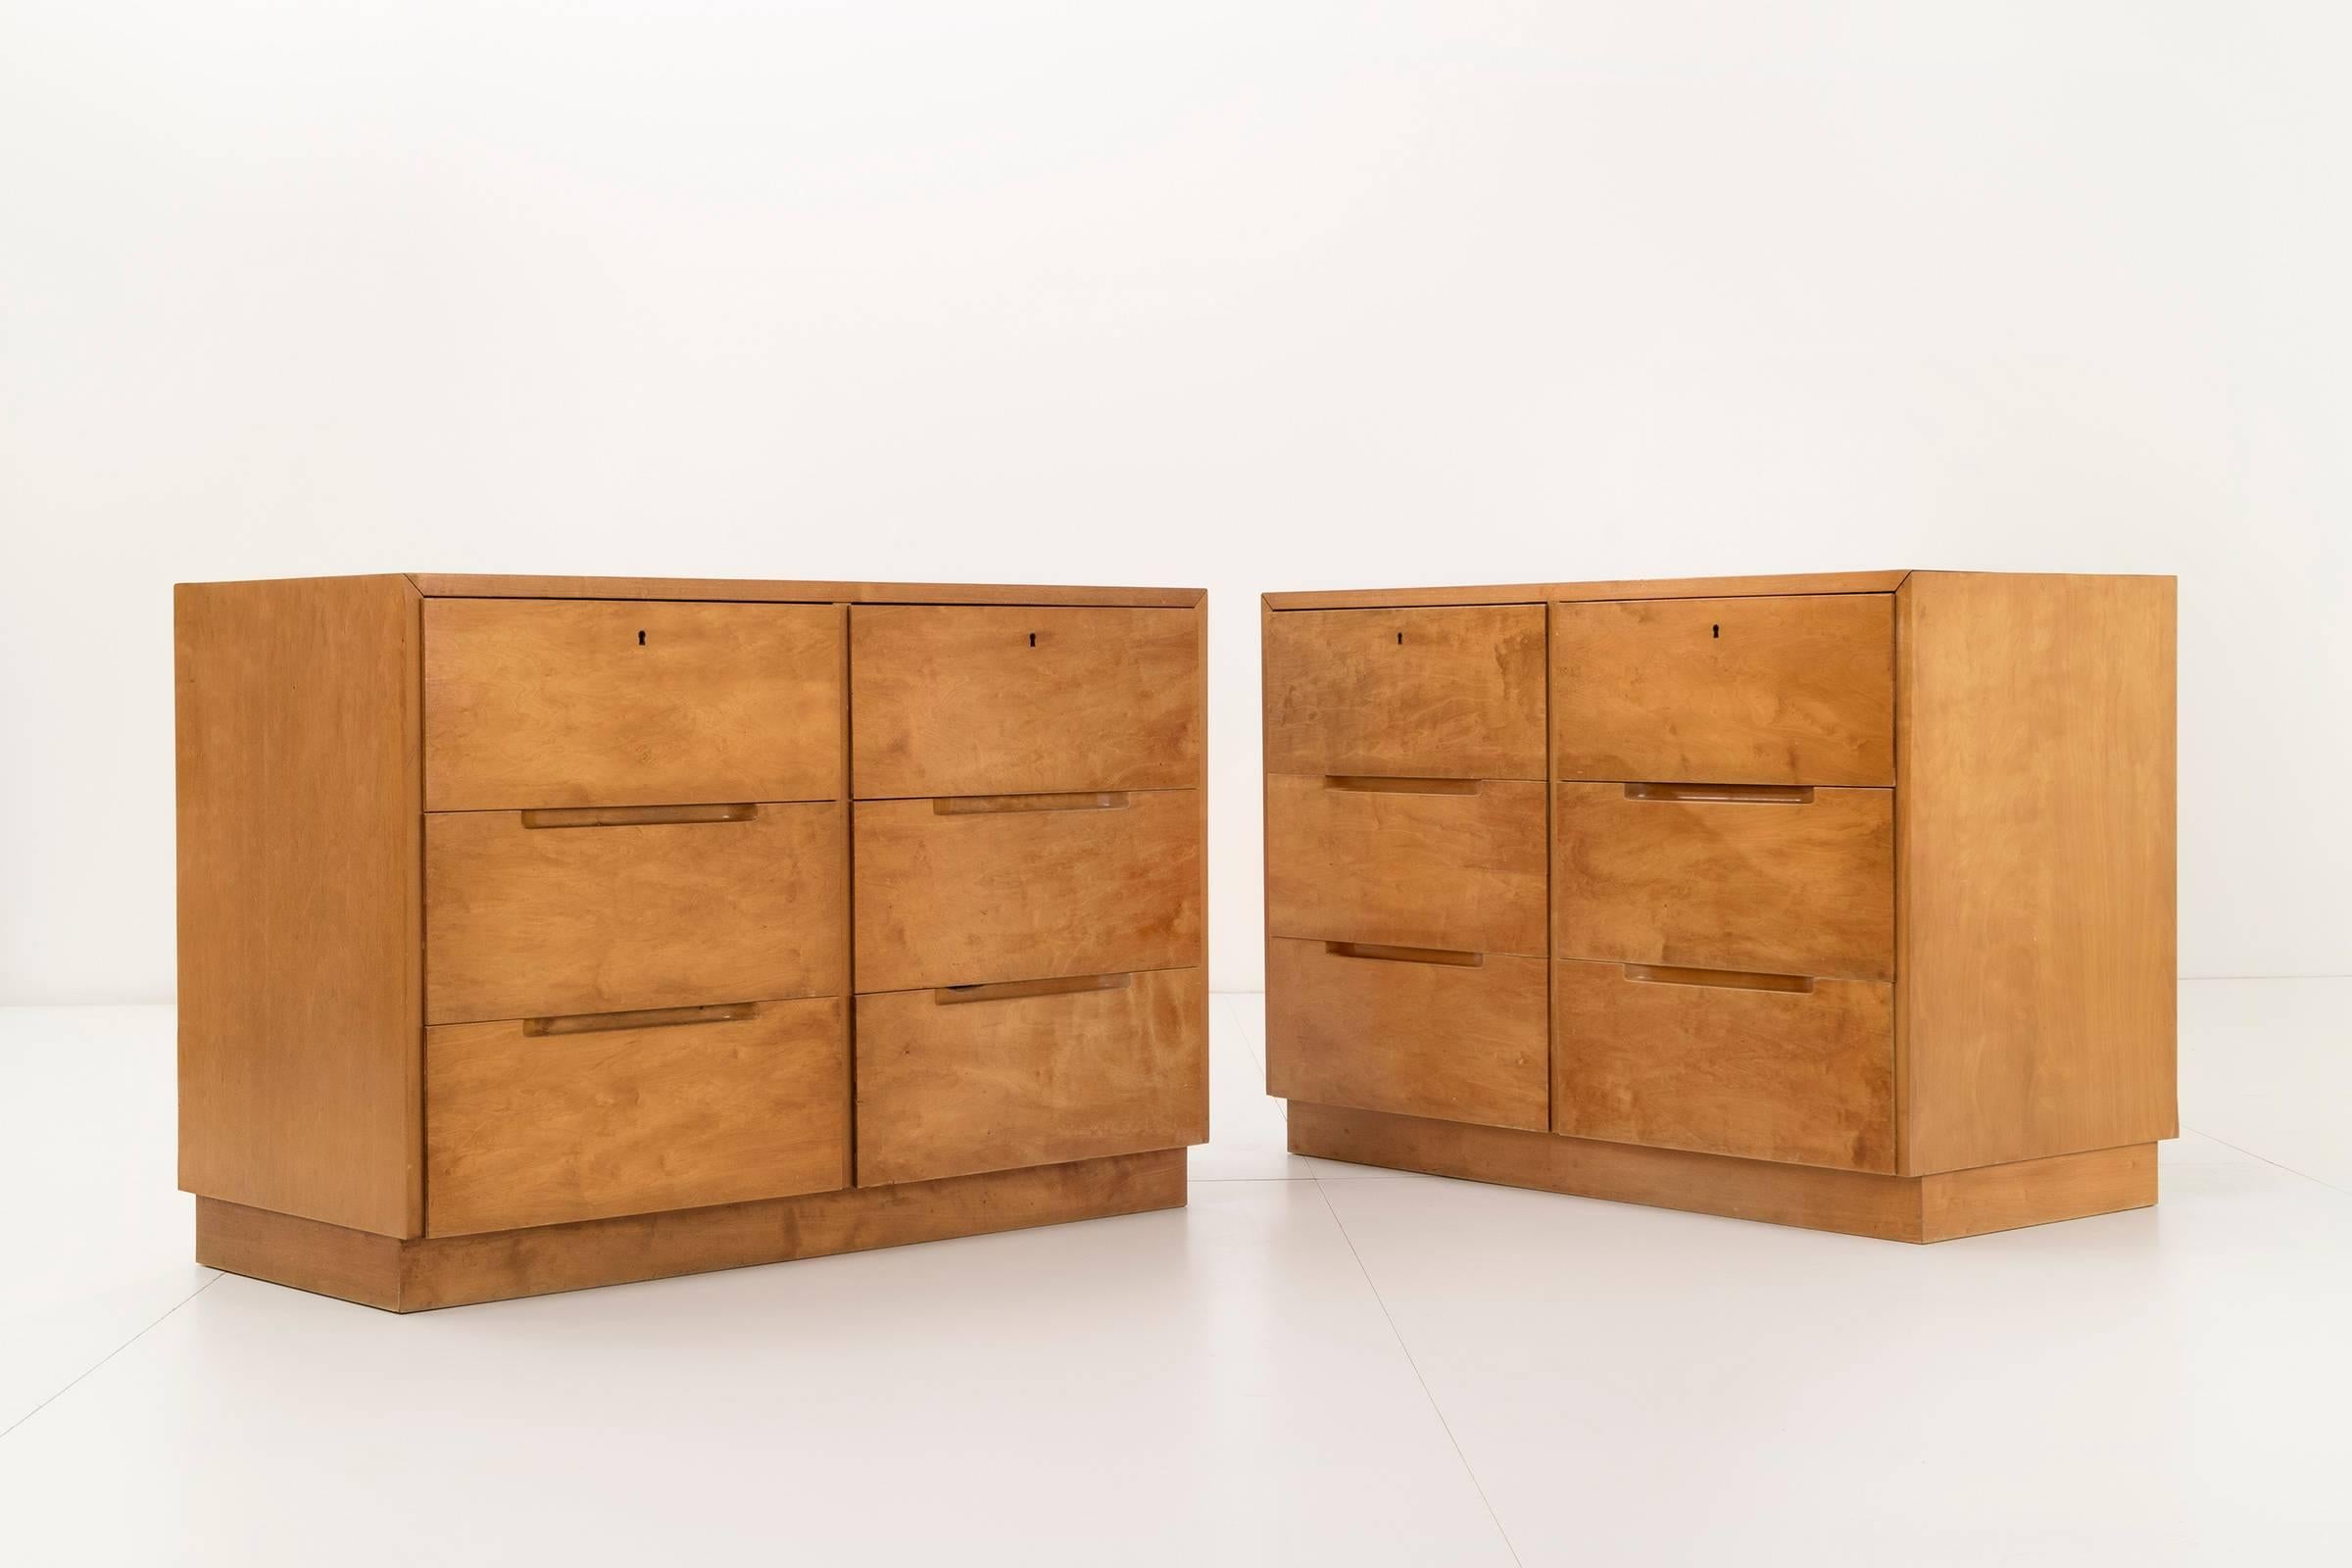 Early pair of Aalto cabinets for Finsven. This set of cabinets features six drawers and is constructed from birth plywood.